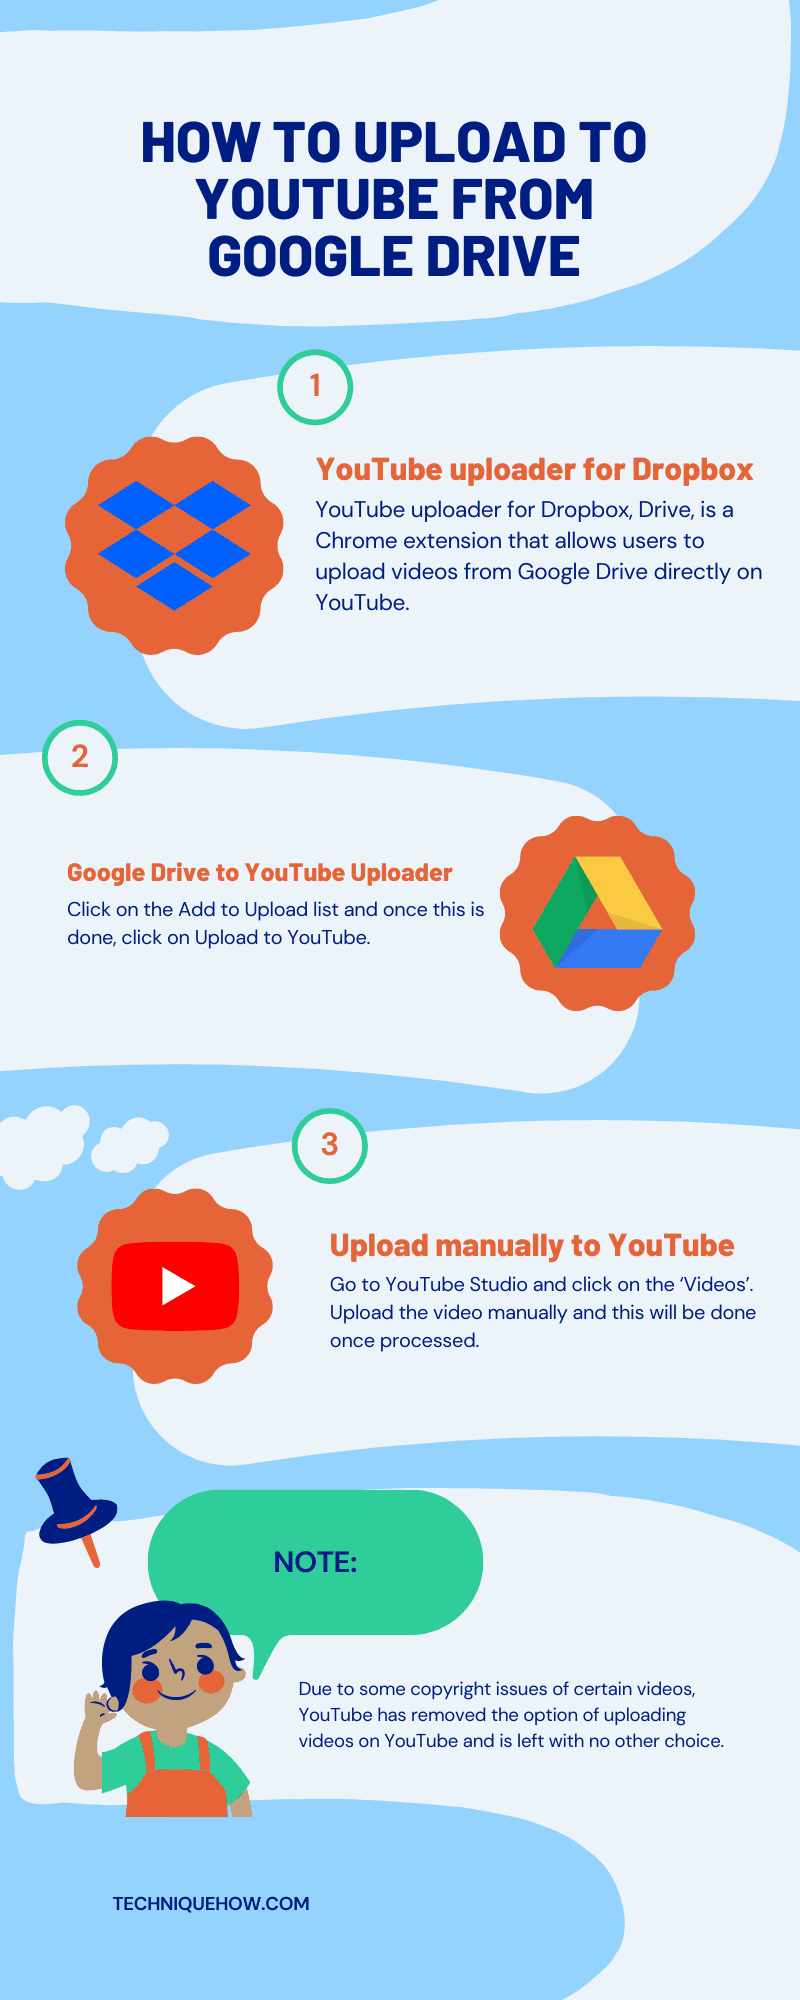 Infographic_How to Upload to YouTube from Google Drive